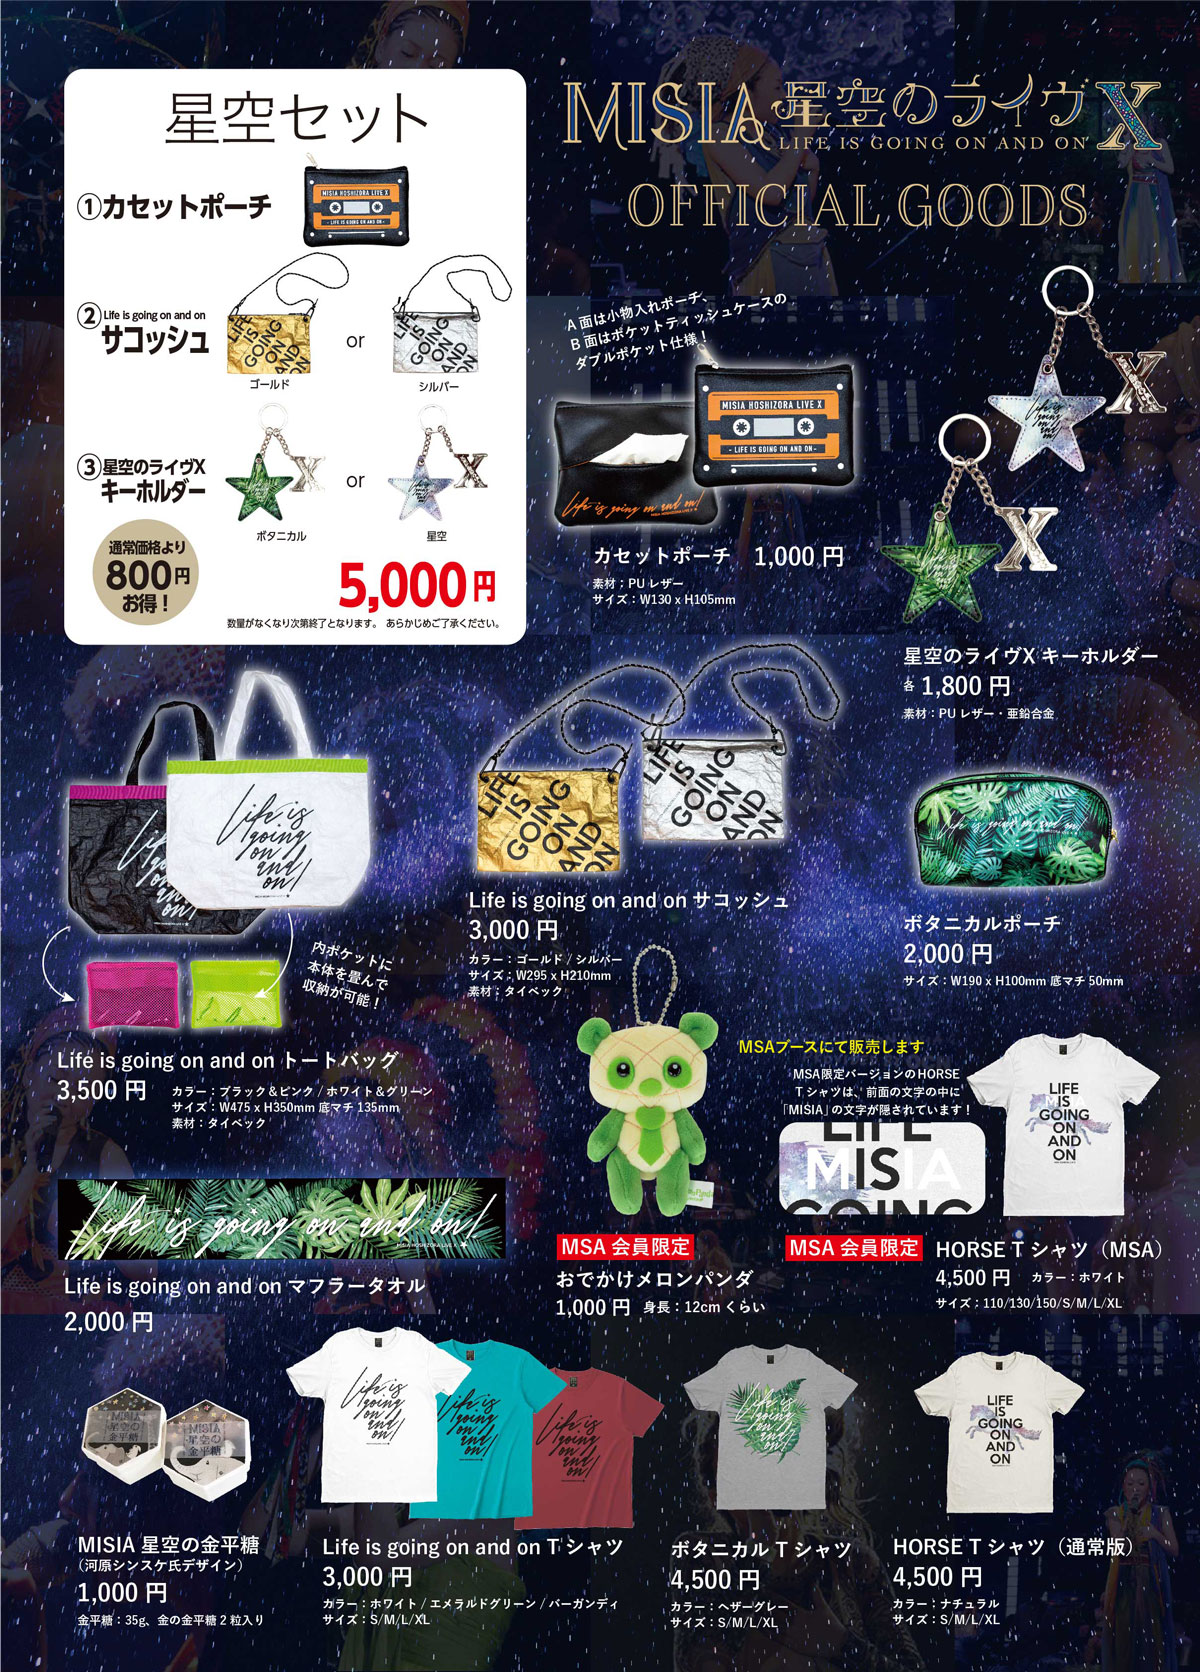 th Anniversary Misia星空のライヴ X Life Is Going On And On 岡山 倉敷市民会館公演 ツアーグッズ Cd Dvd先行販売ならびにfc新規入会 継続手続き に関するお知らせ News 公式 Misia Misia Official Site